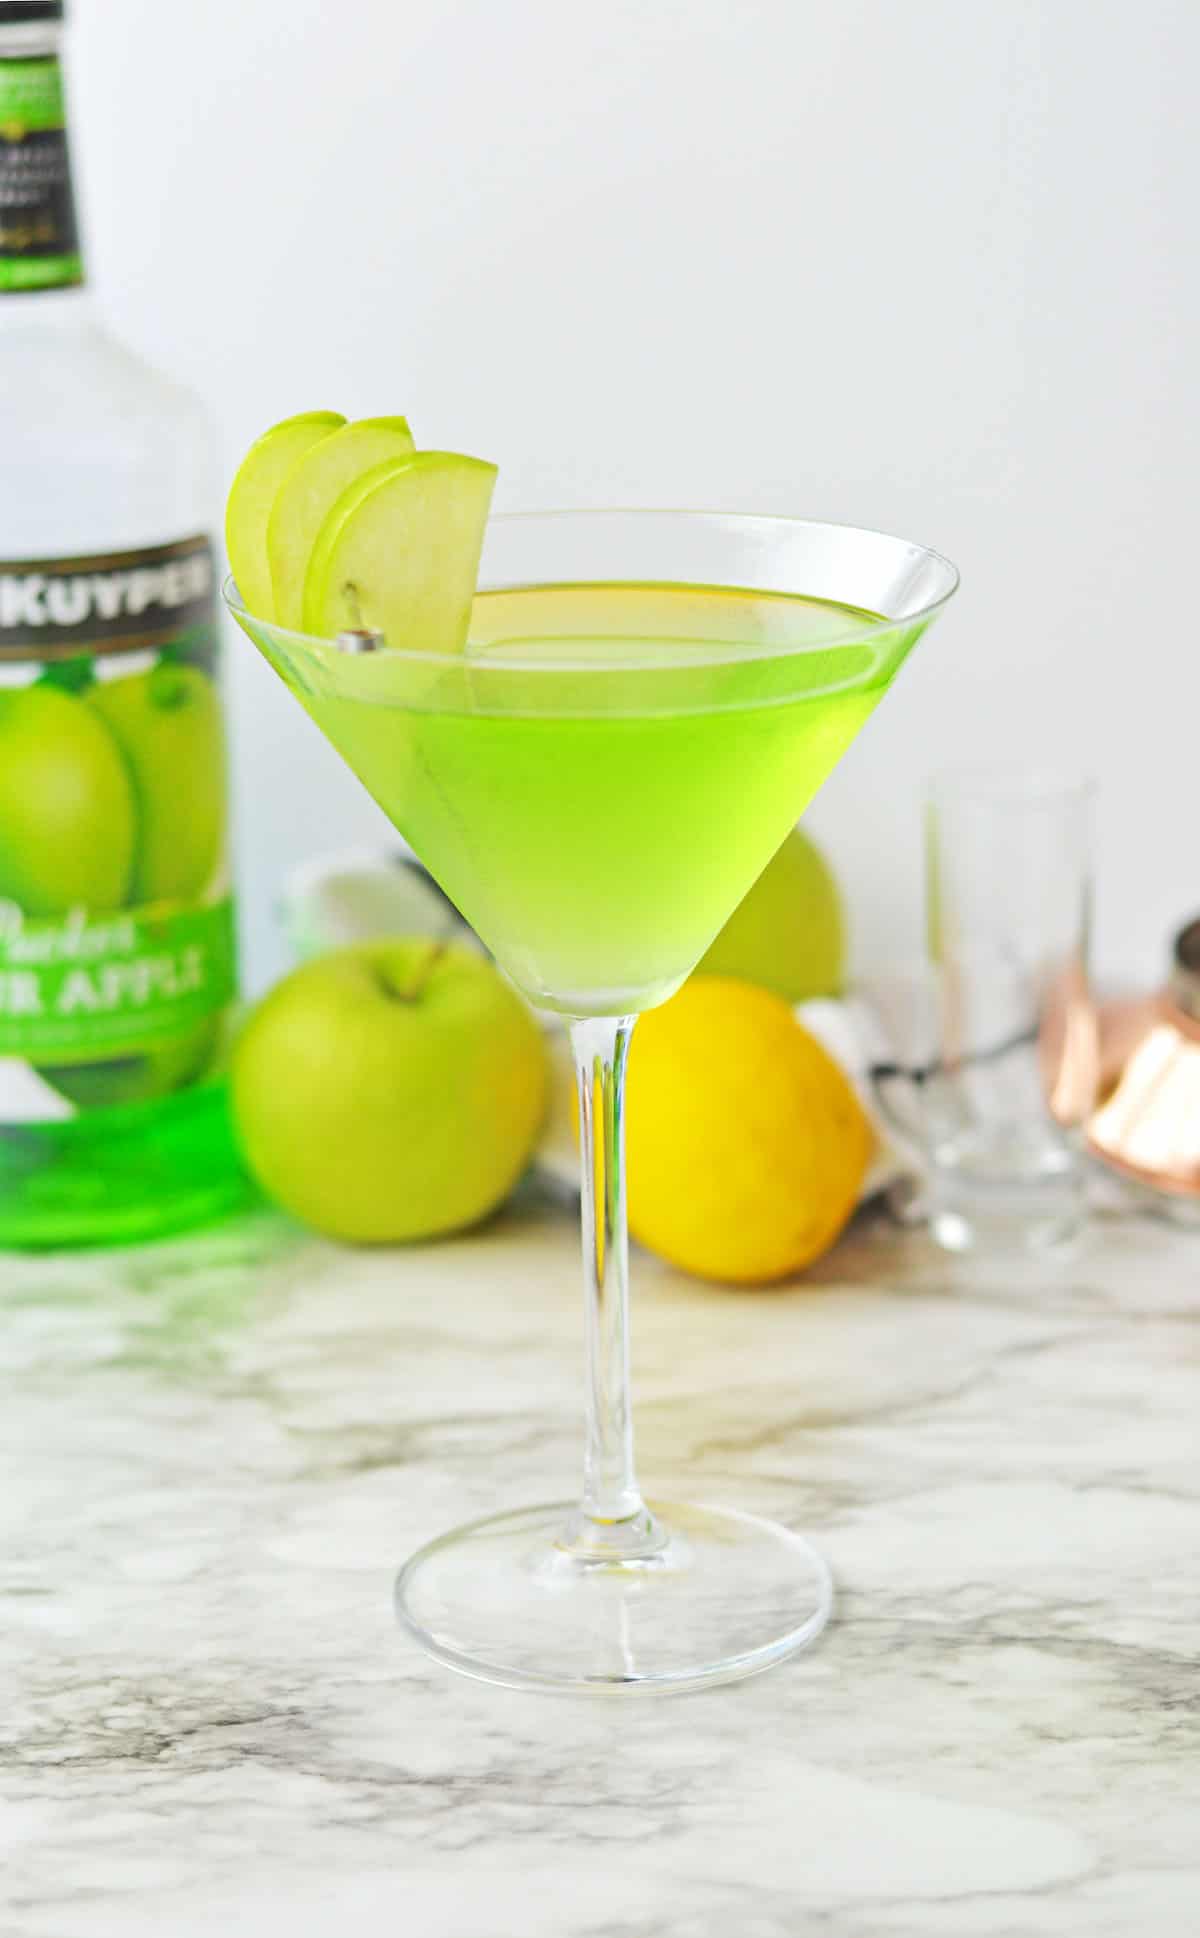 Green liquid in a martini glass with green apple slices.